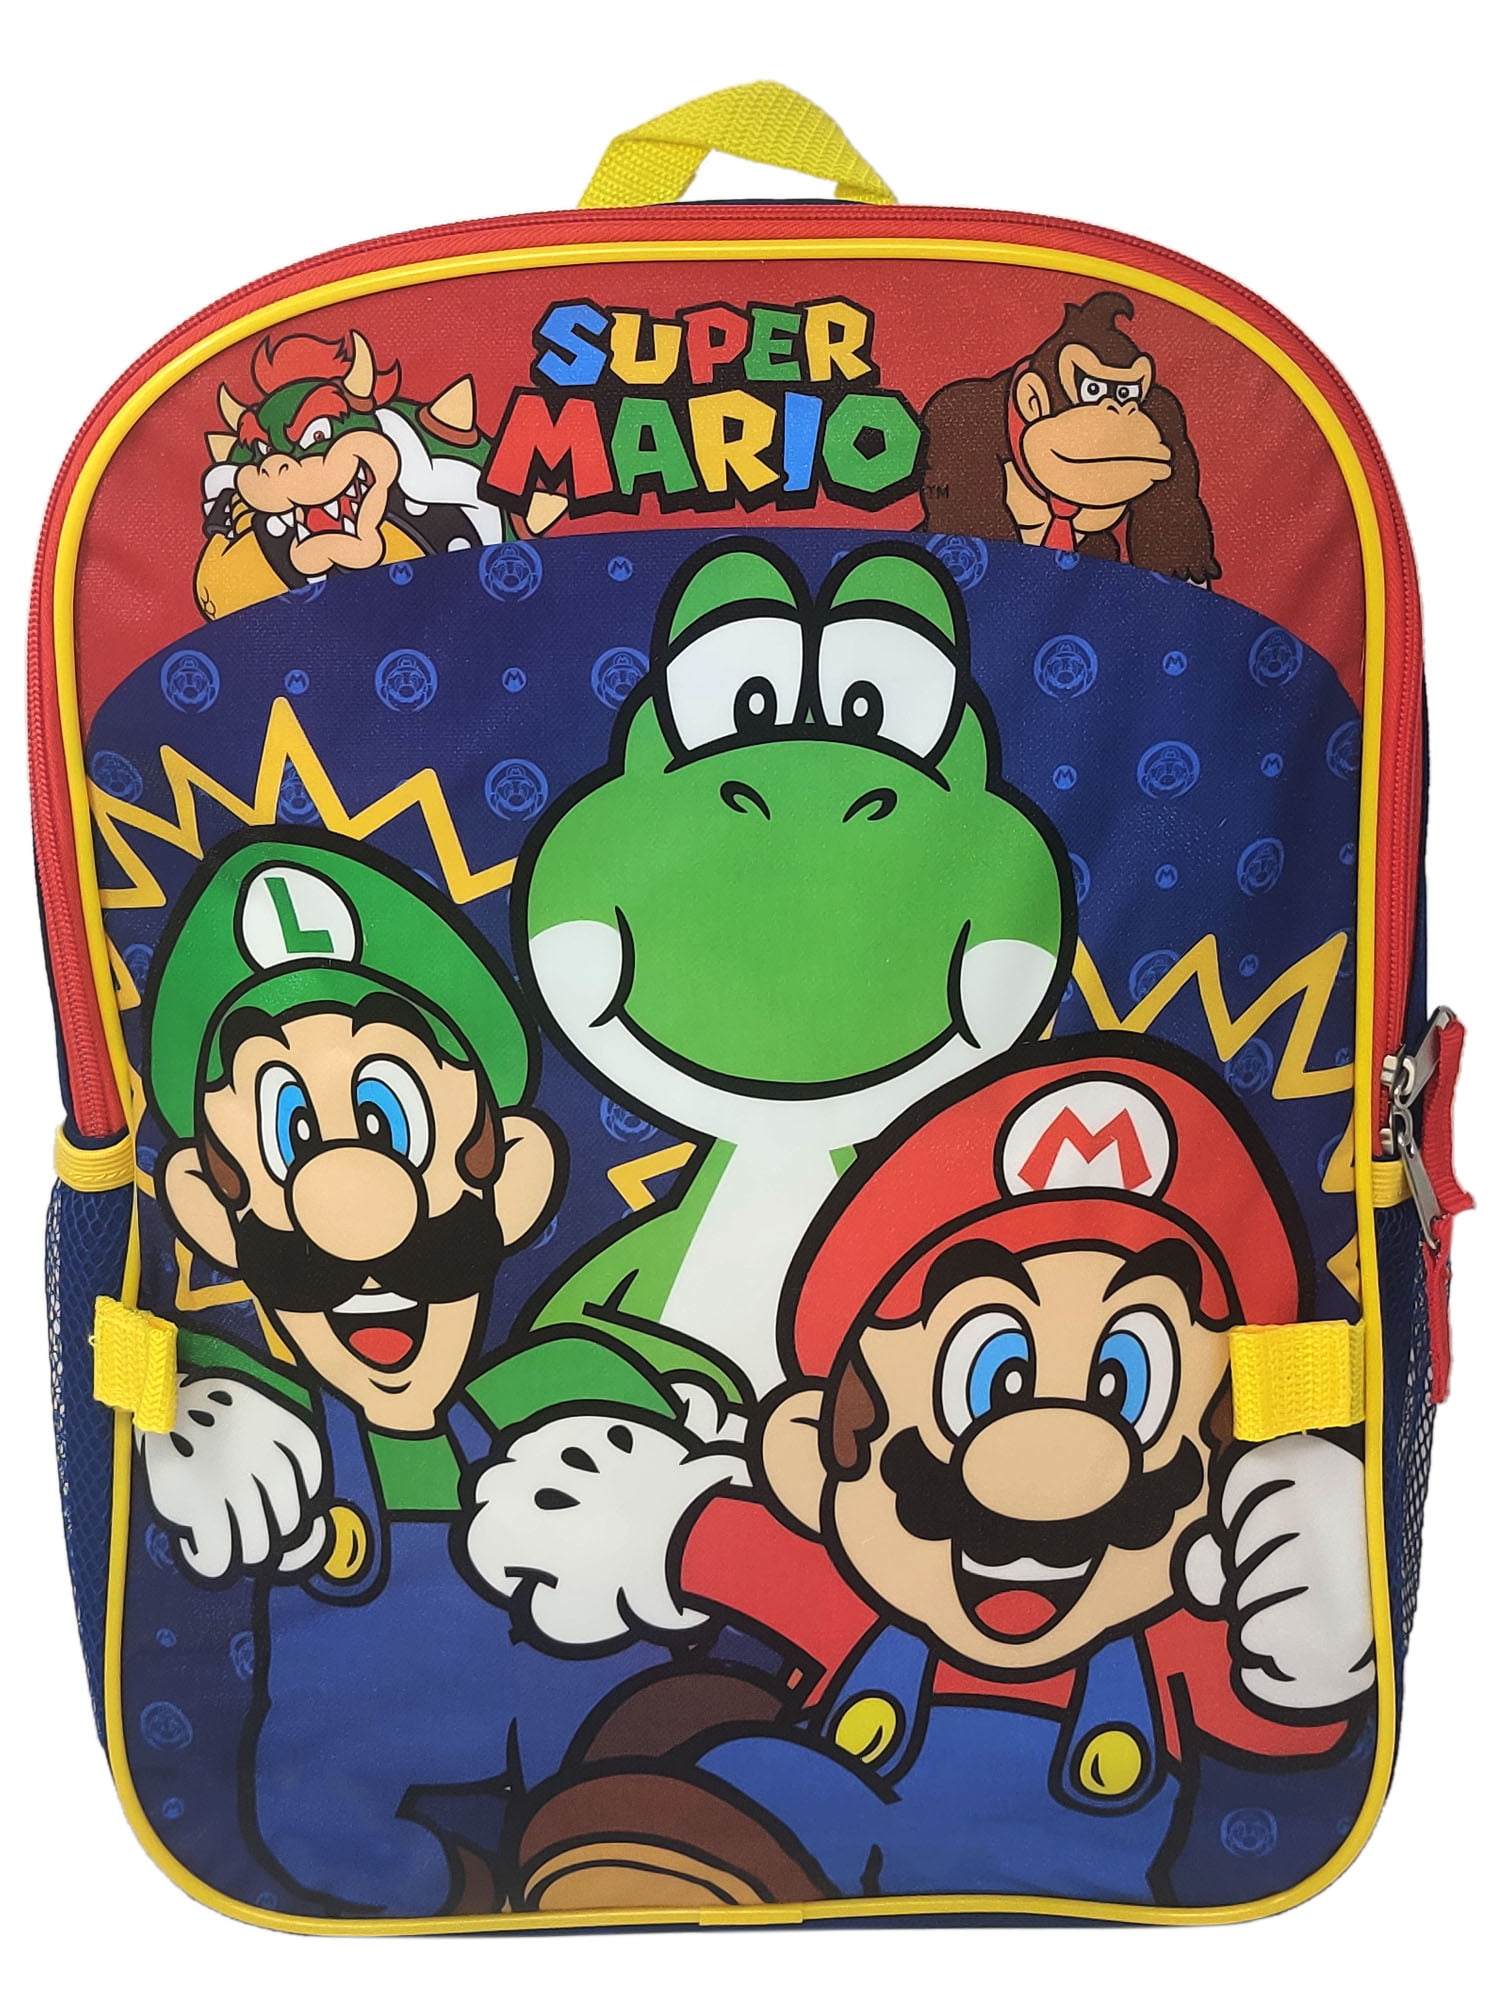  Super Mario Backpack and Lunch Box Set for Kids - Mario  Backpack and Lunch Bag Bundle with 200 Mario Stickers, Water Bottle, and  More (Super Mario School Supplies for Boys) 